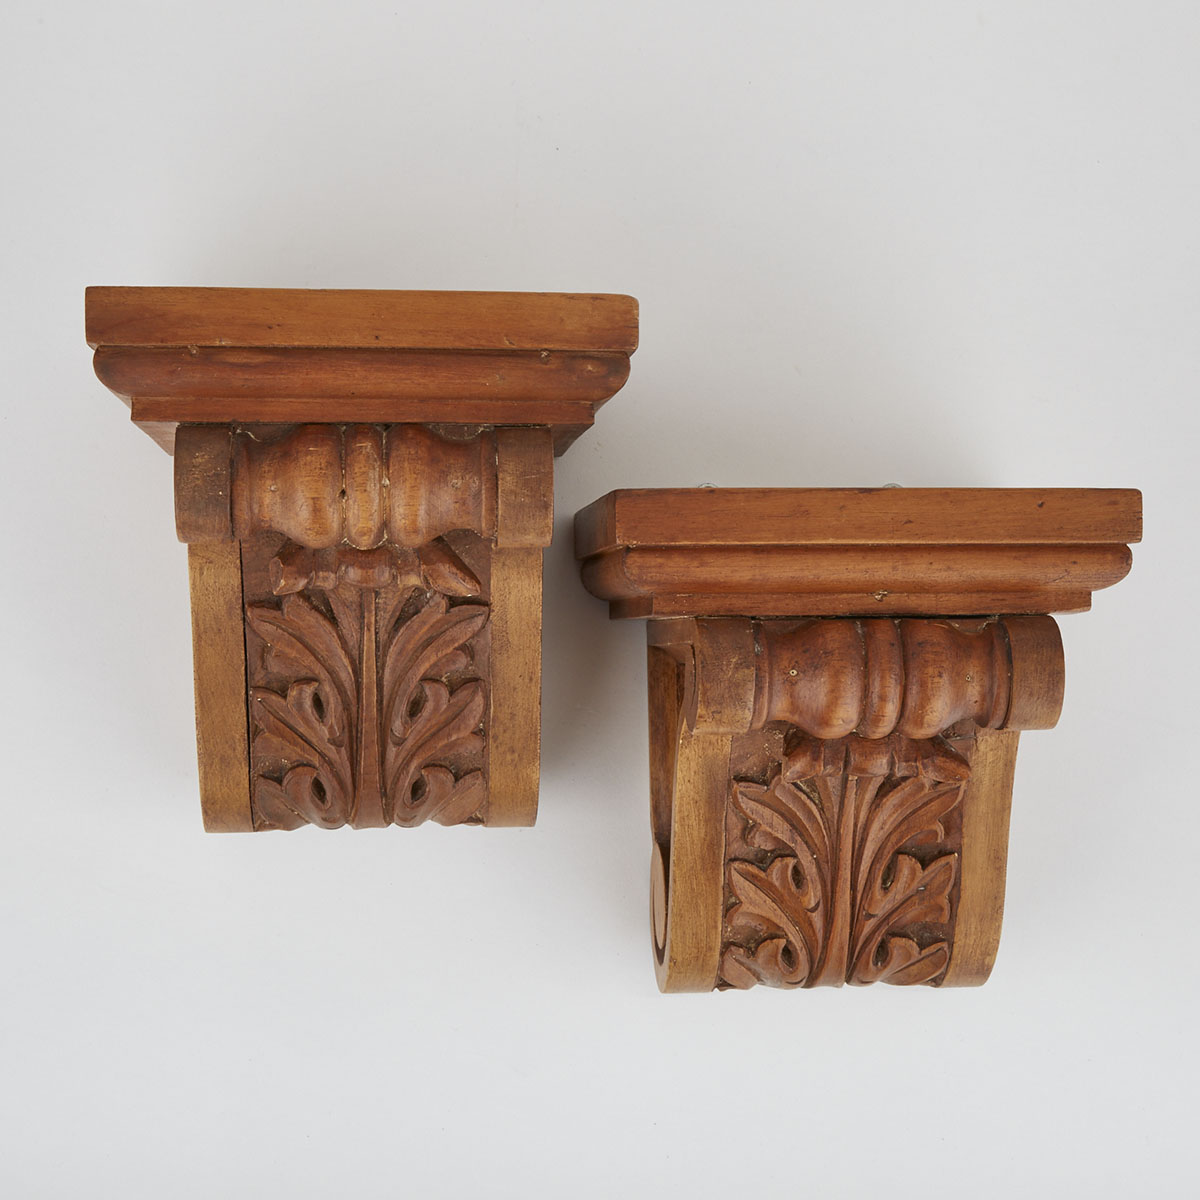 Pair of Acanthus Carved Walnut Corbel Wall Brackets, 19th and 20th Centuries